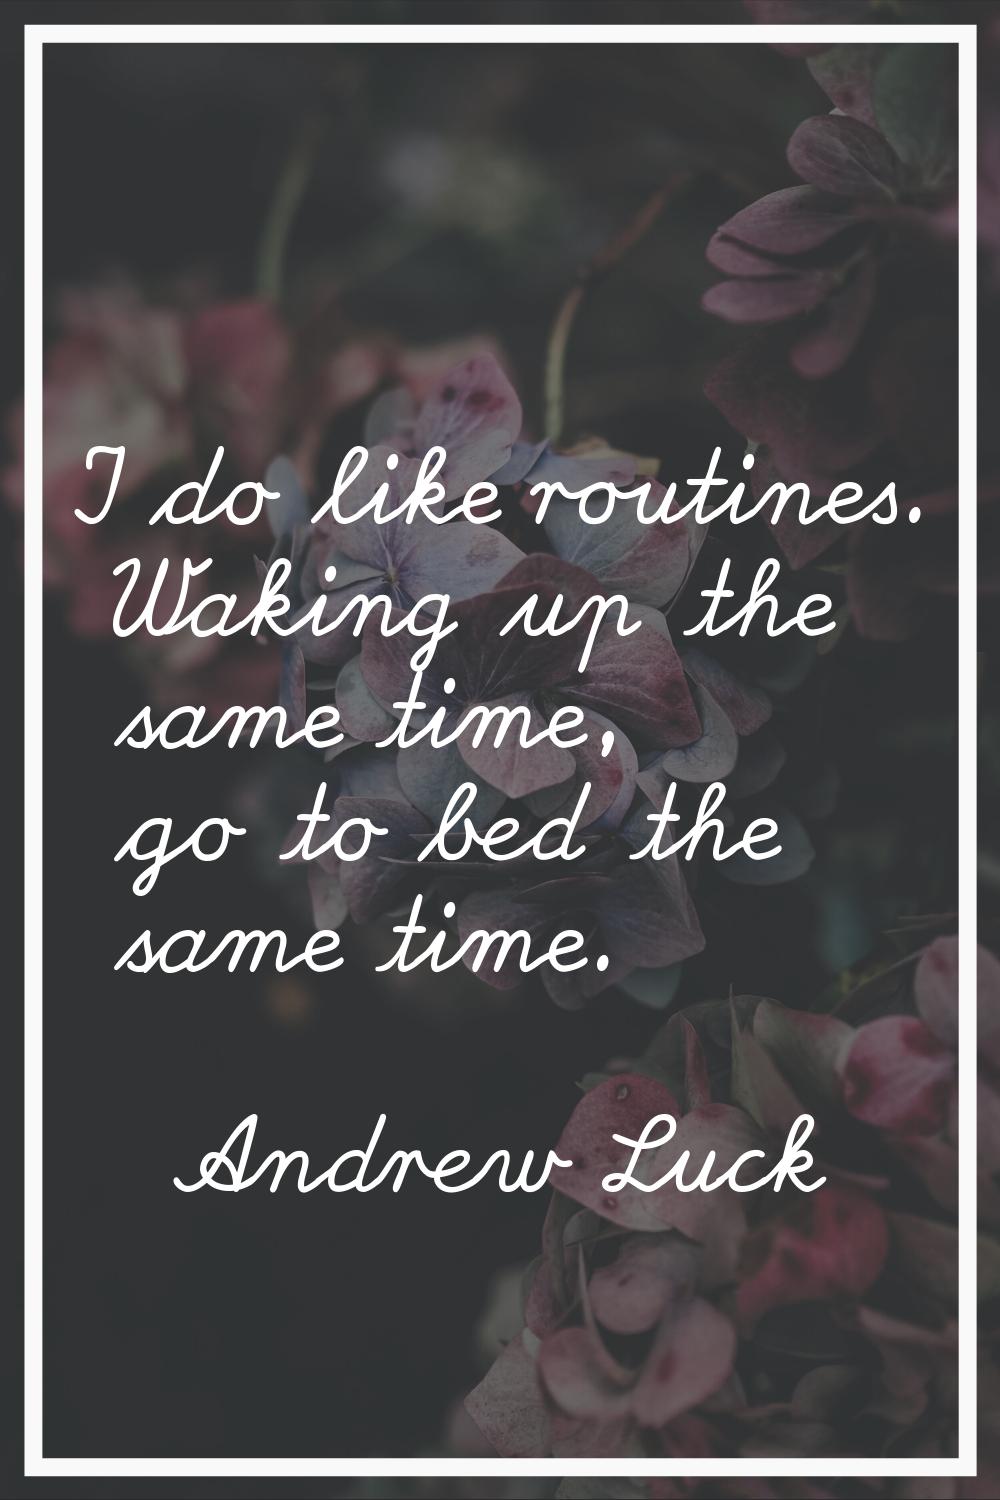 I do like routines. Waking up the same time, go to bed the same time.